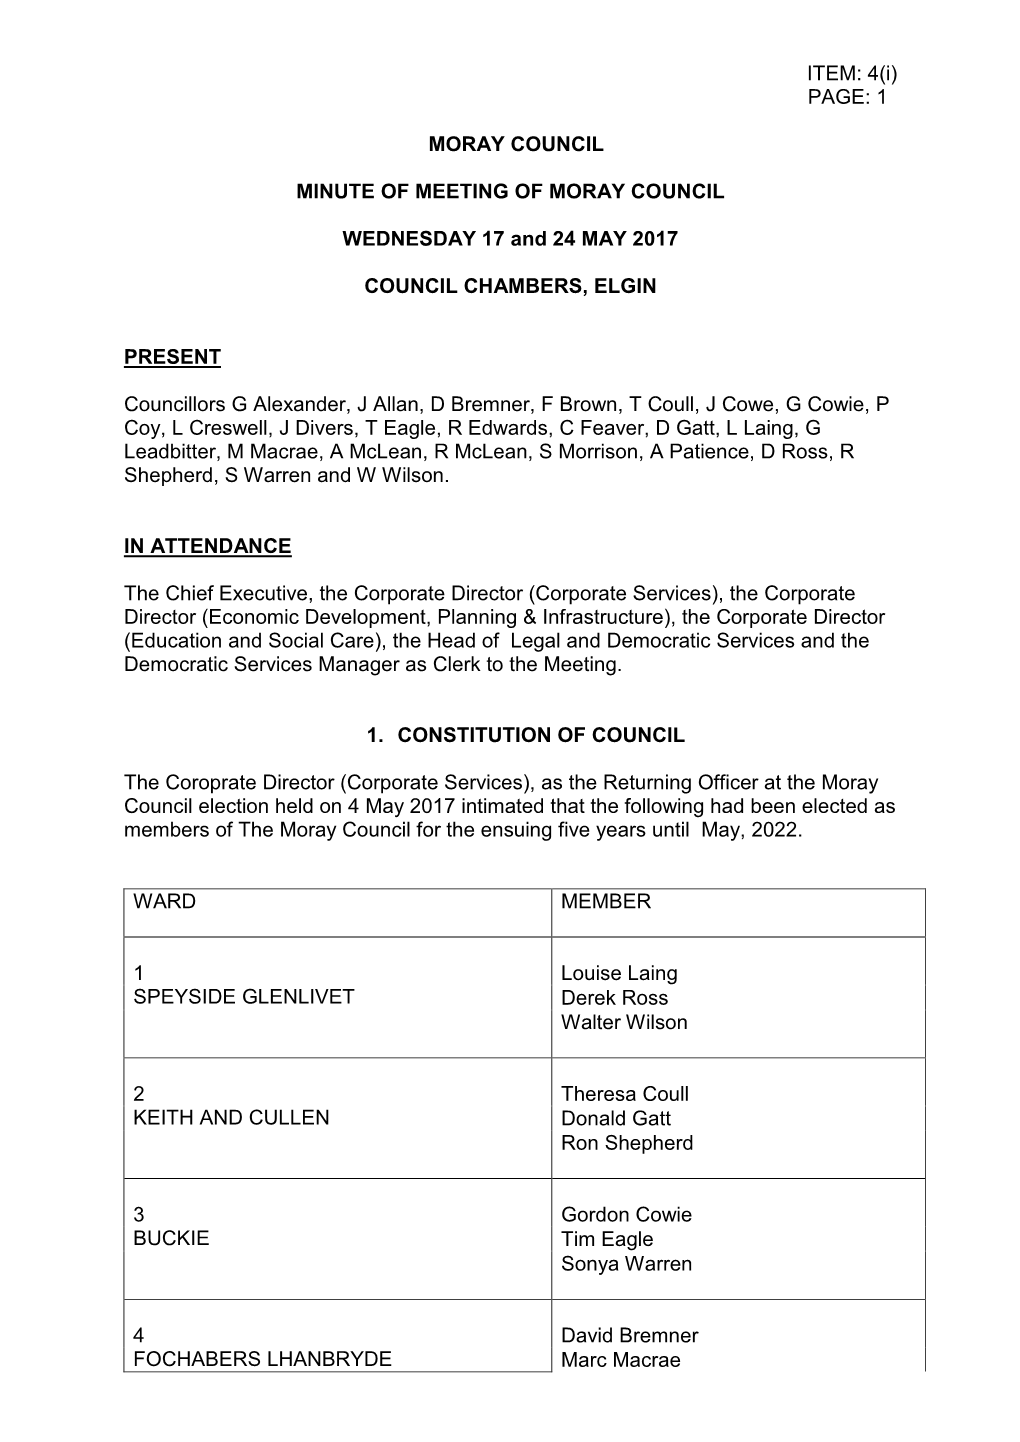 Minute of Meeting Dated 17 May 2017